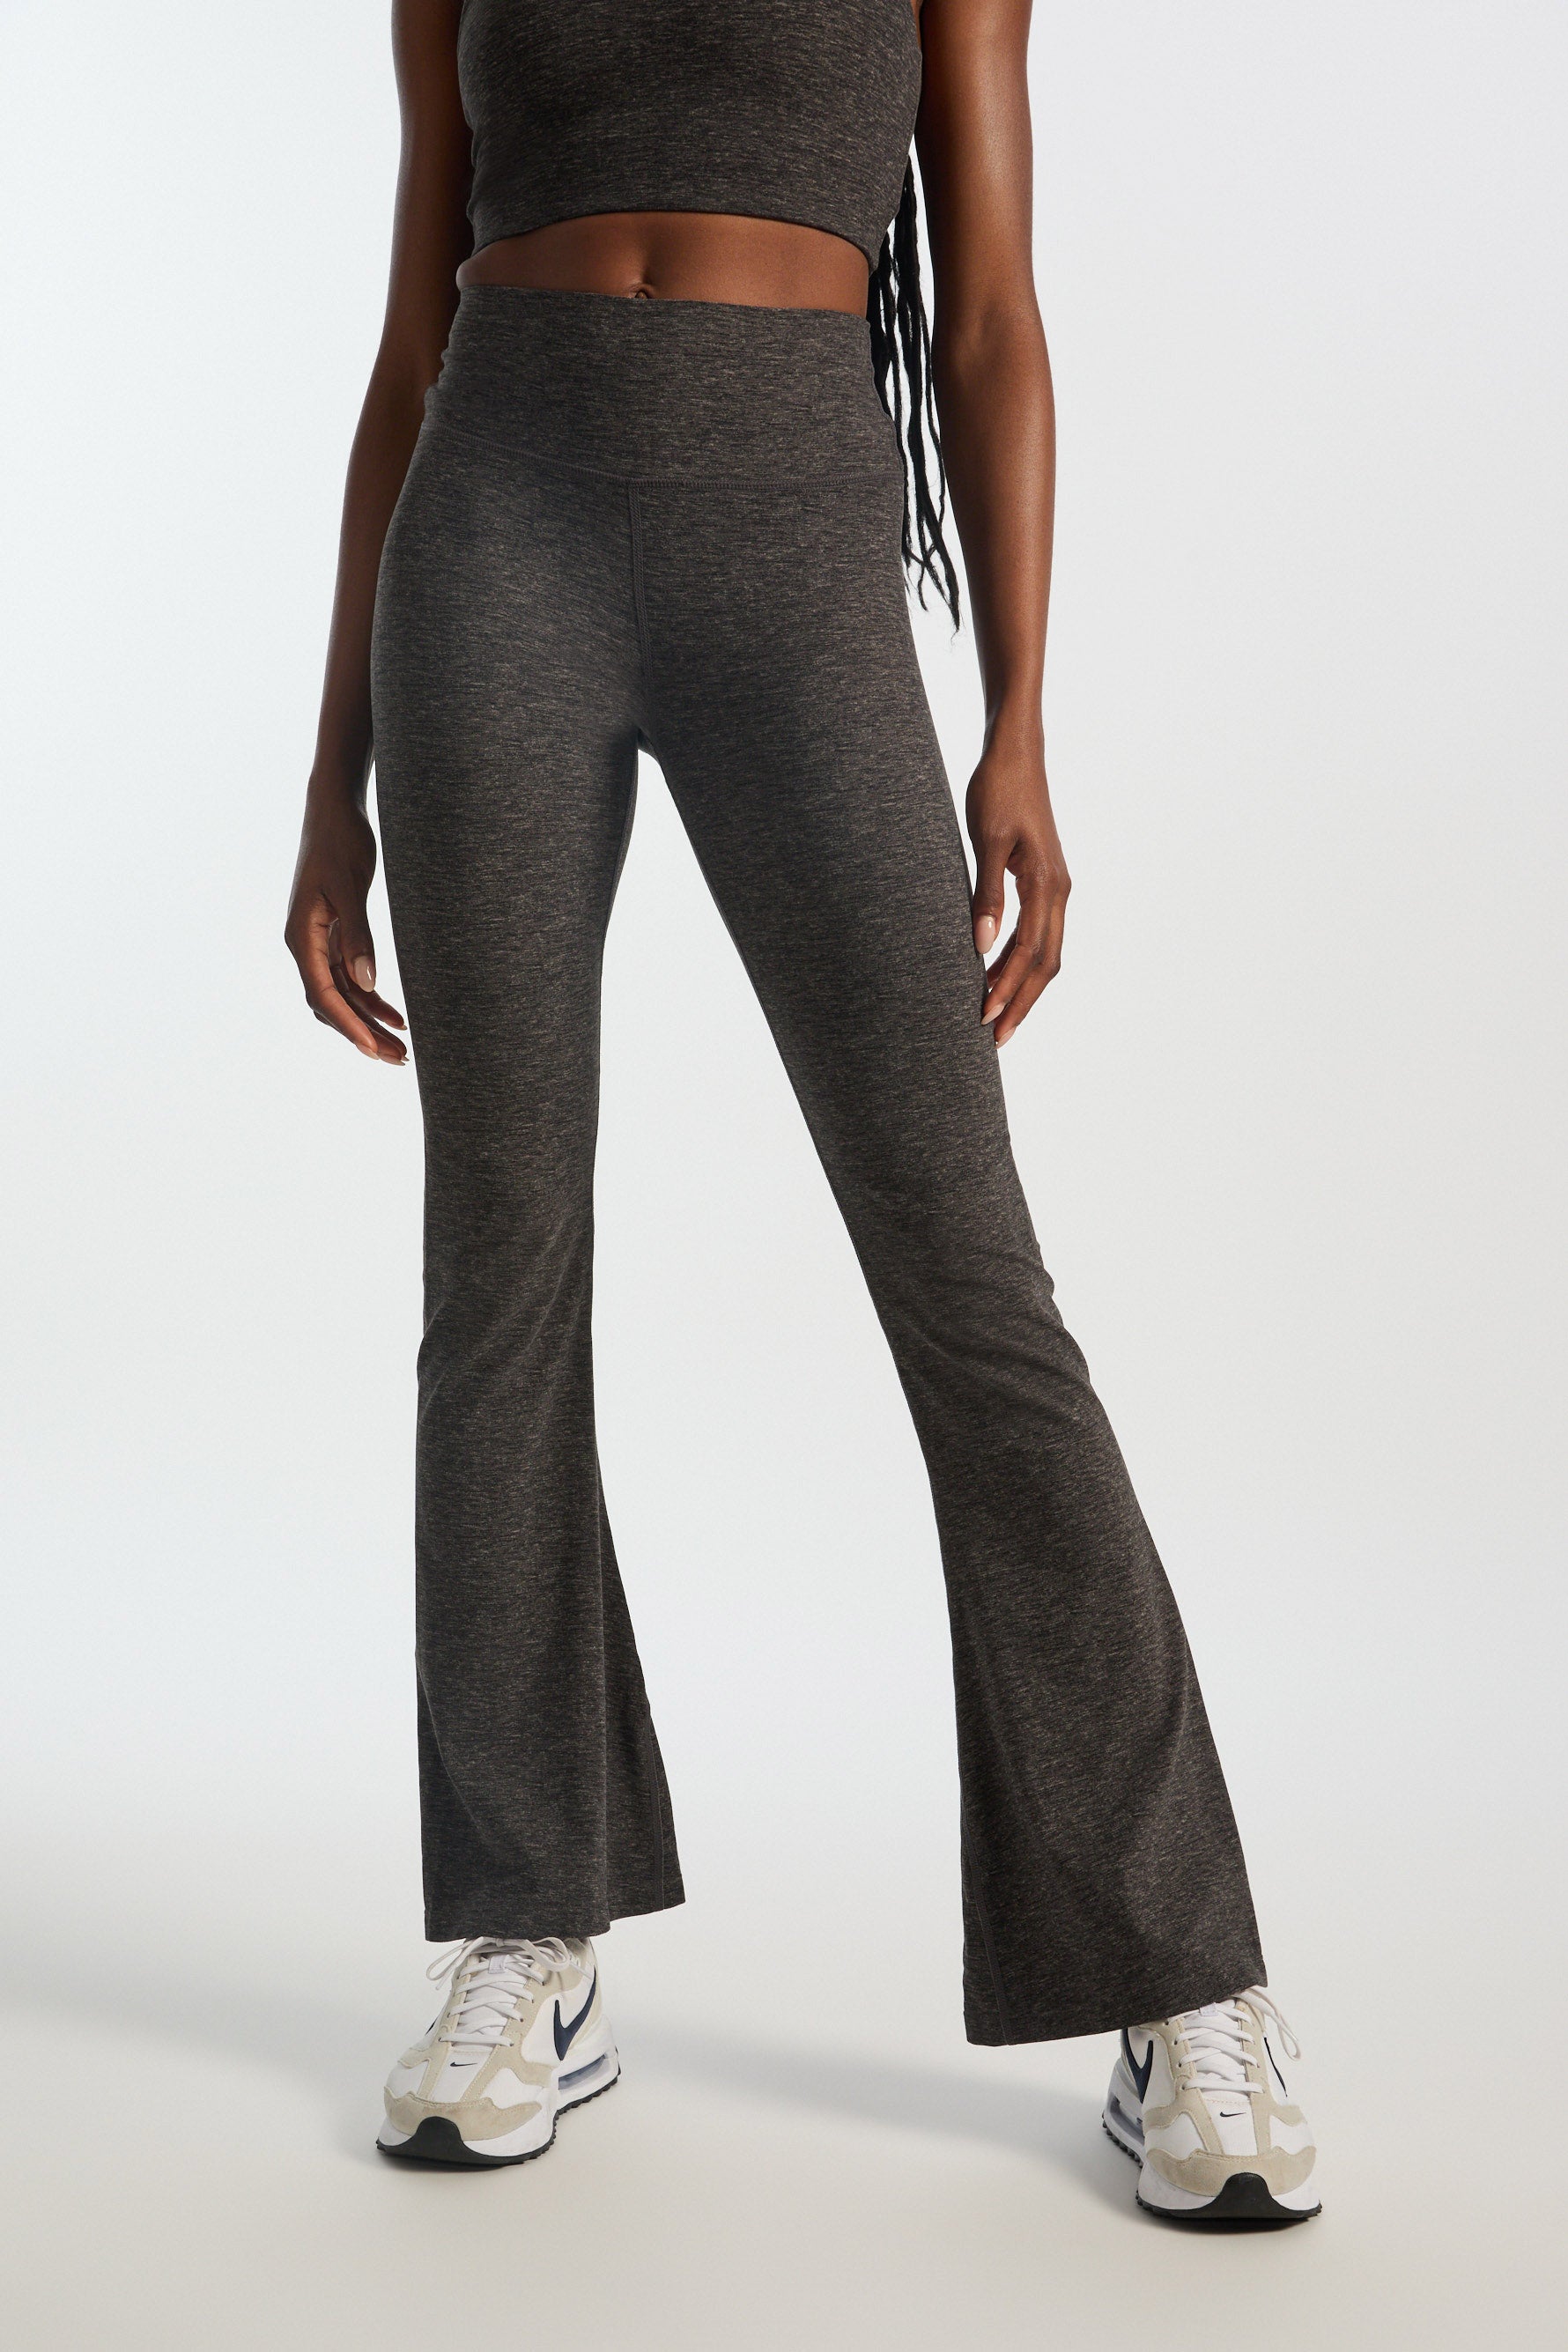 Splits59 Raquel Flare Gray Size XS - $50 (53% Off Retail) - From Madelyn